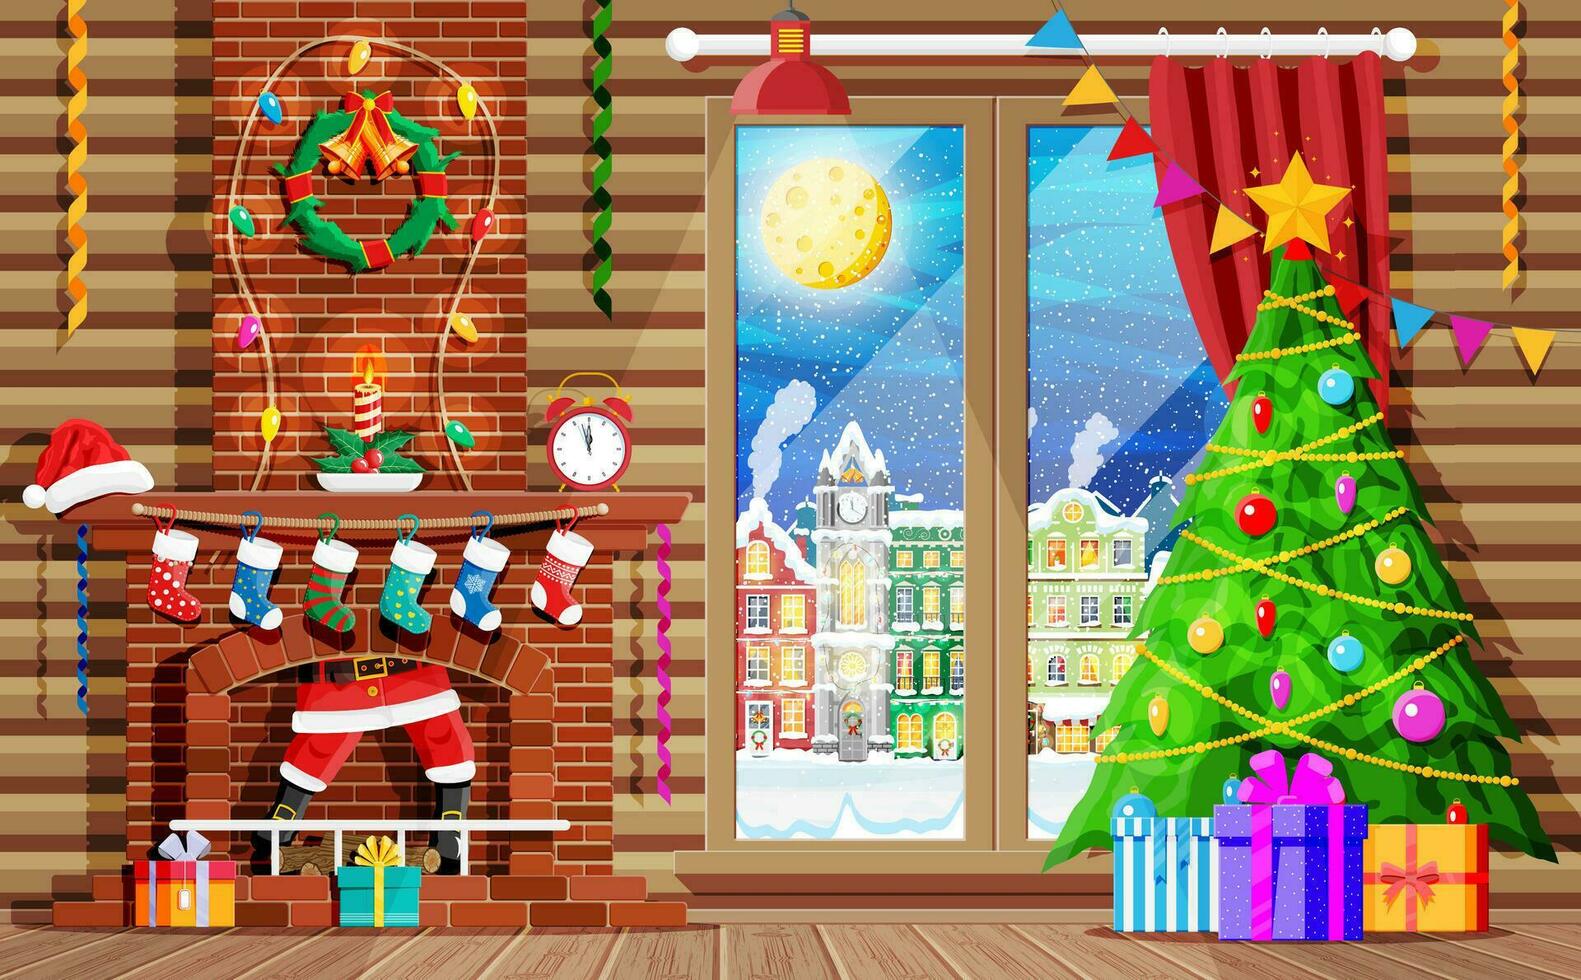 Cozy interior of room with window and fireplace. Happy new year decoration. Merry christmas holiday. New year and xmas celebration. Winter landscape, tree, snow, town. Cartoon flat vector illustration